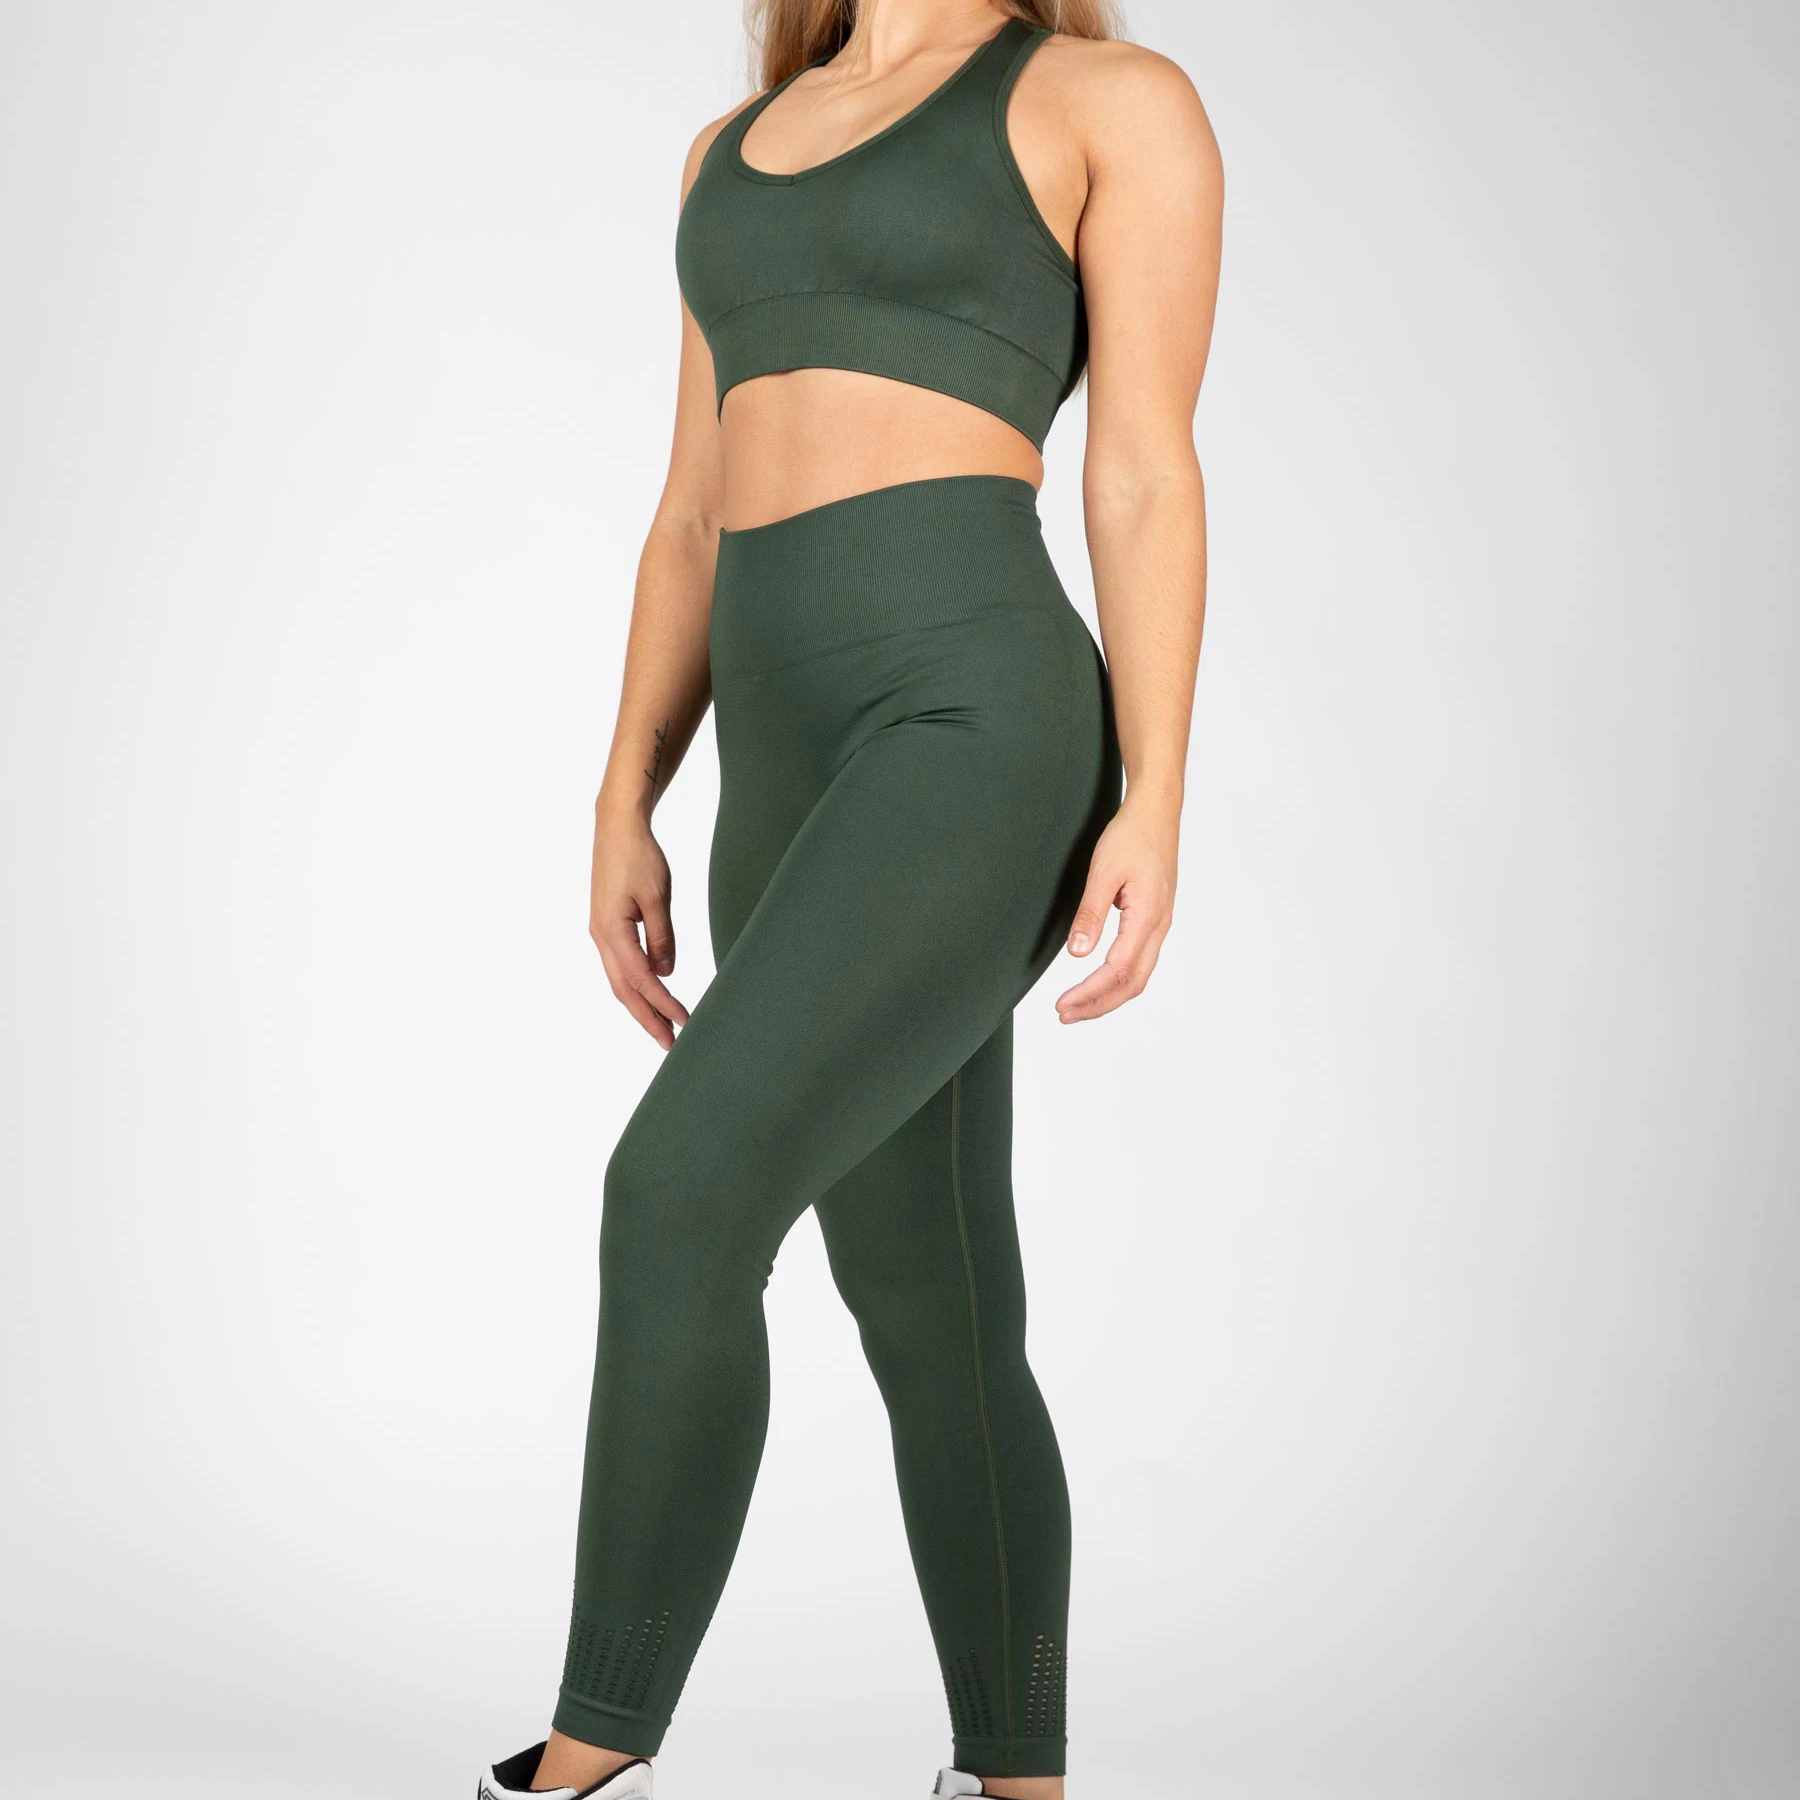 Piece Yoga Outfit | vlr.eng.br